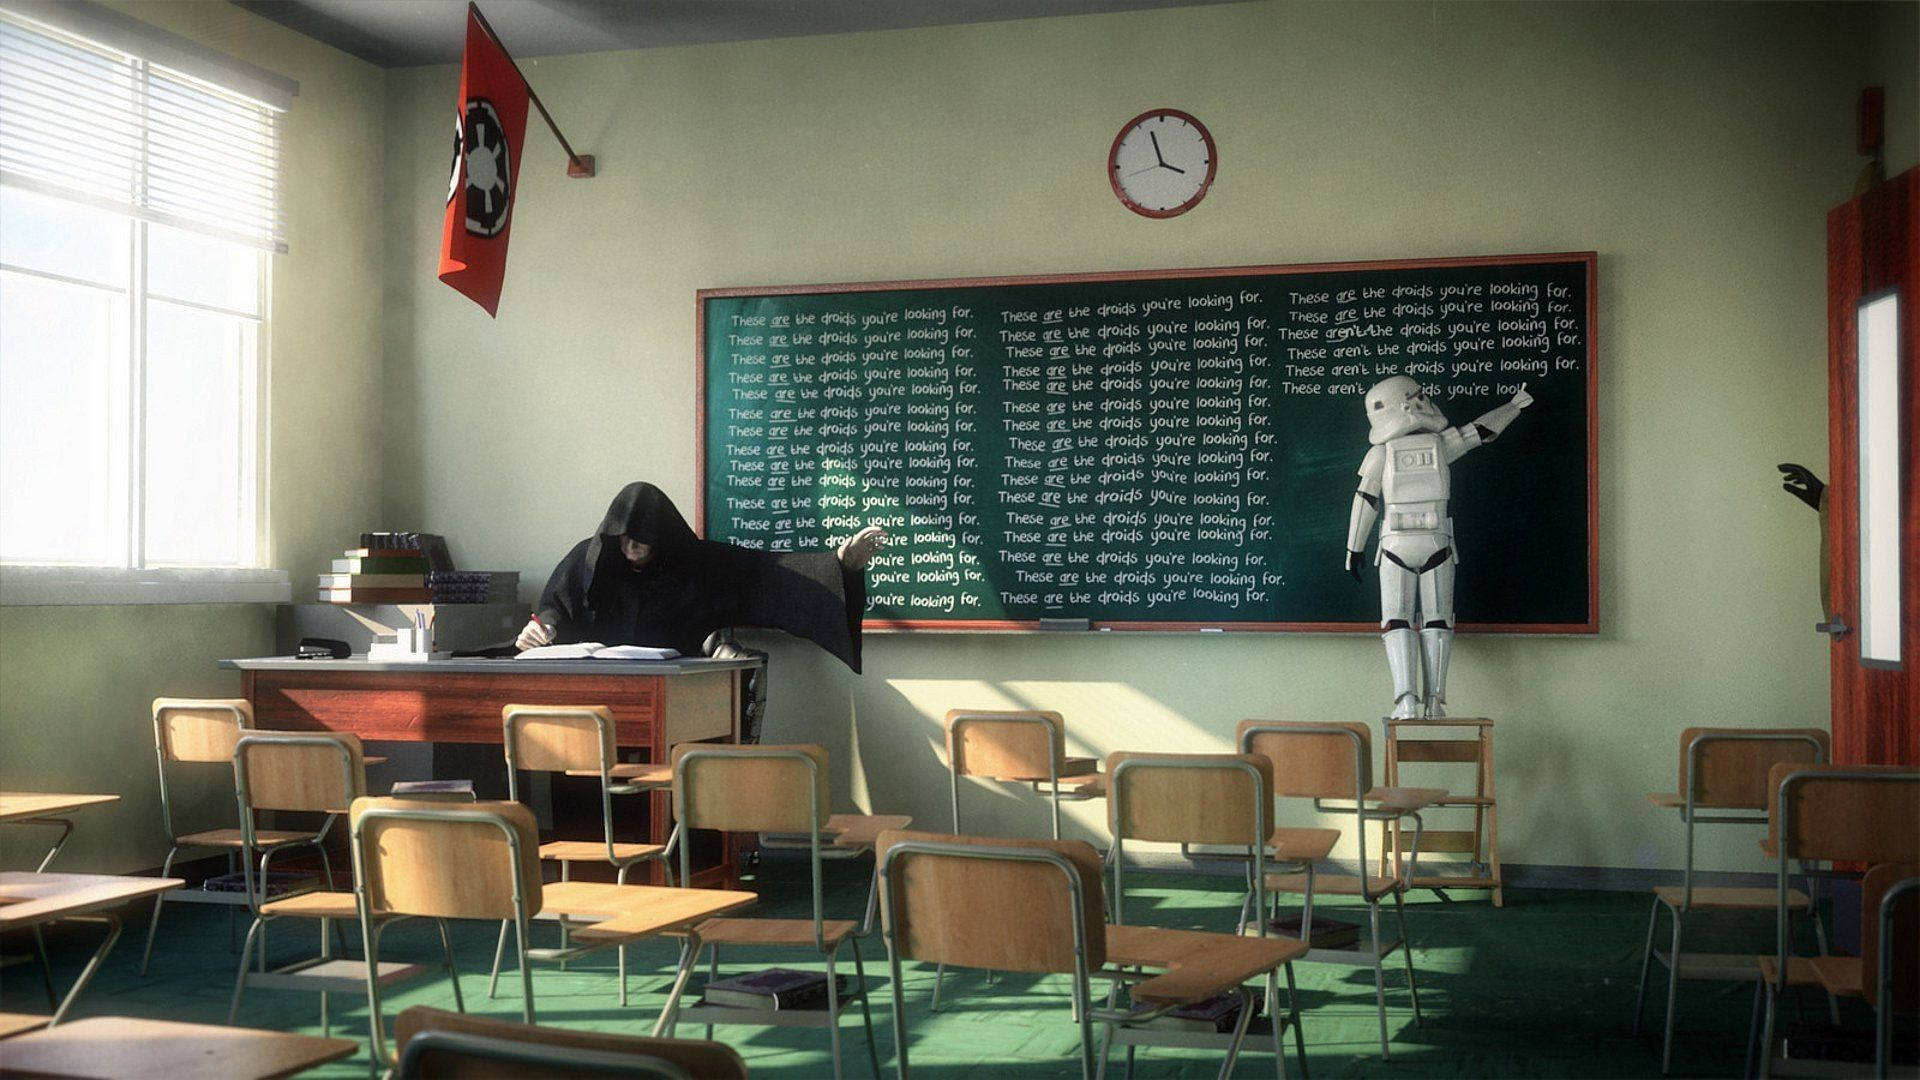 Star Wars Characters In A Classroom Background